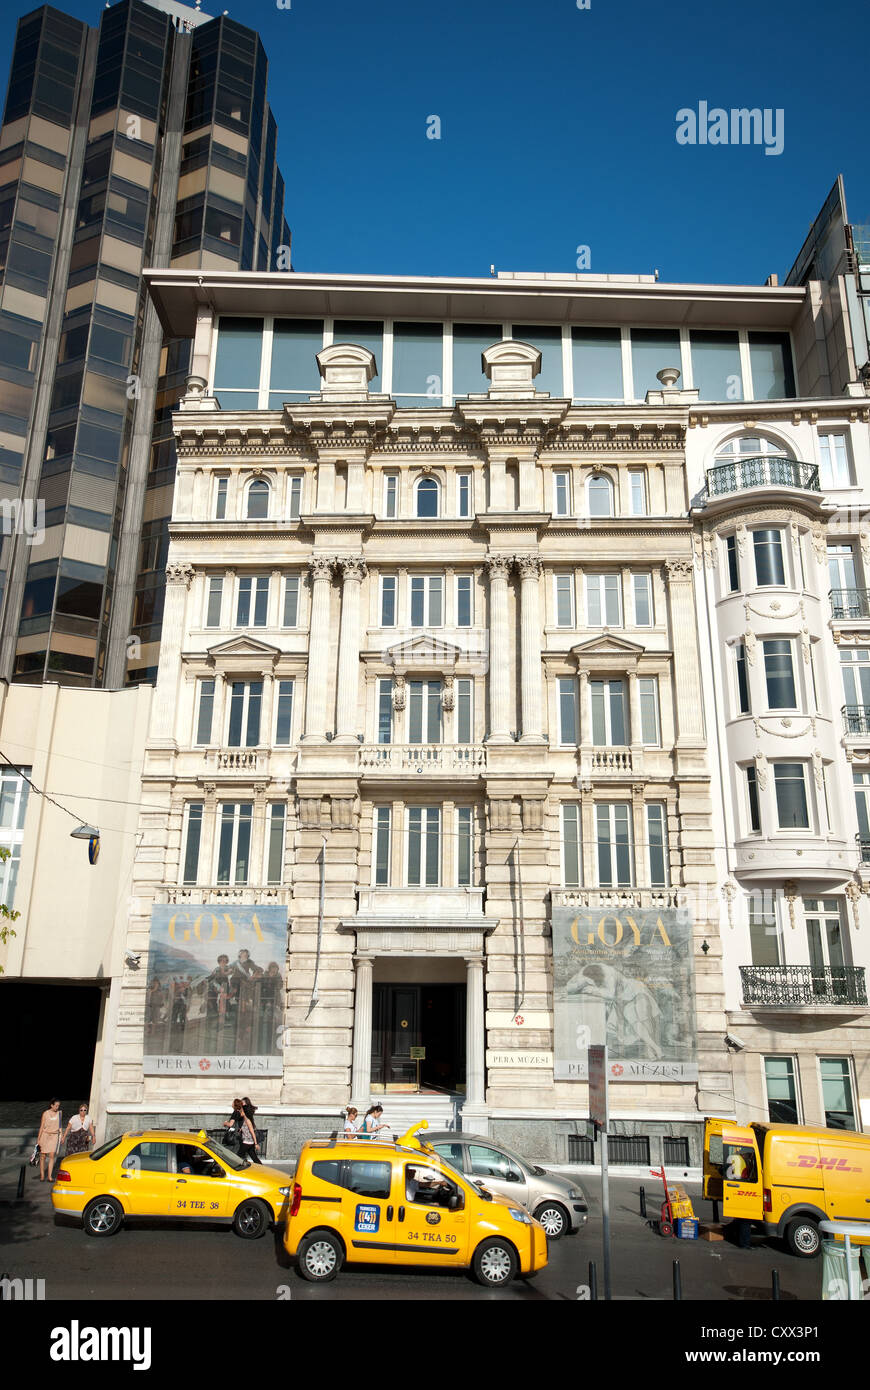 ISTANBUL, TURKEY. The Pera Museum (formerly the Bristol Hotel) in the Beyoglu district of the city. 2012. Stock Photo